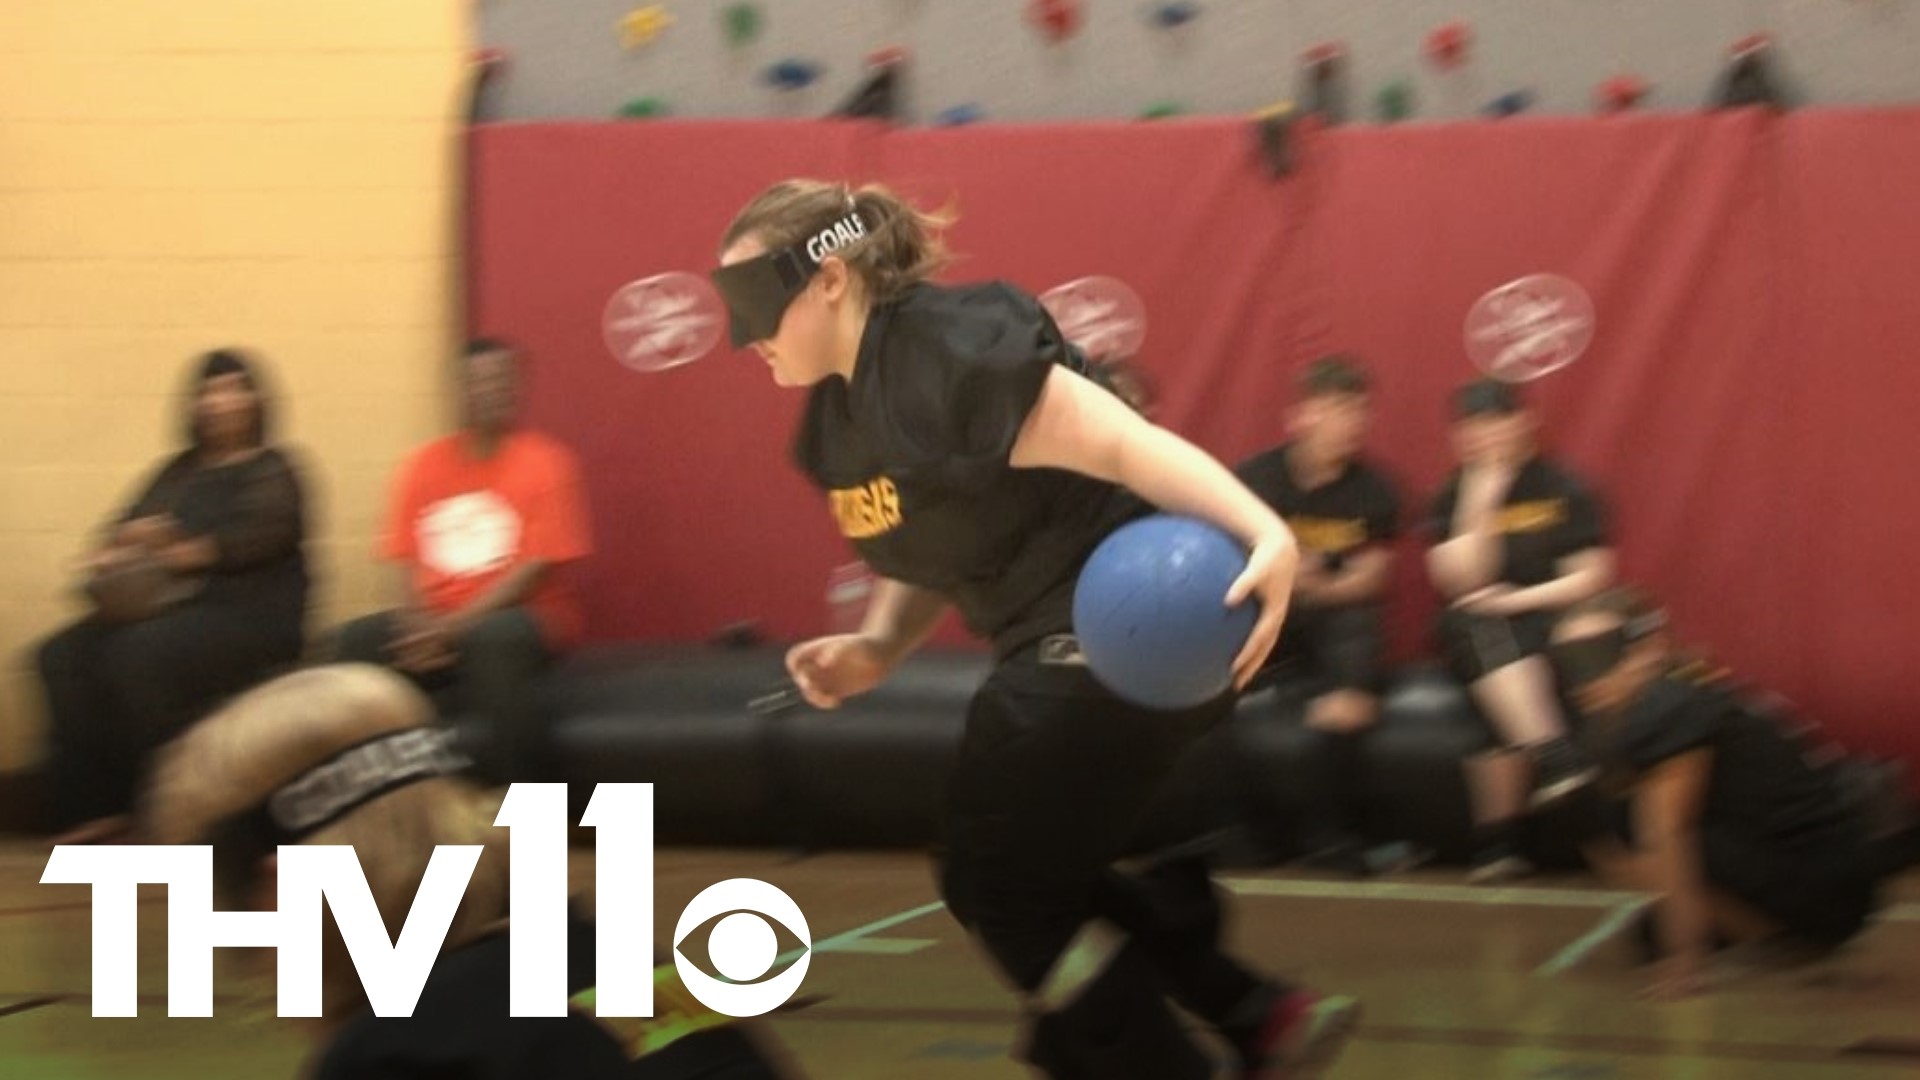 ASBVI students are embracing the opportunities of goalball, a sport that uses goggles to level the playing field.